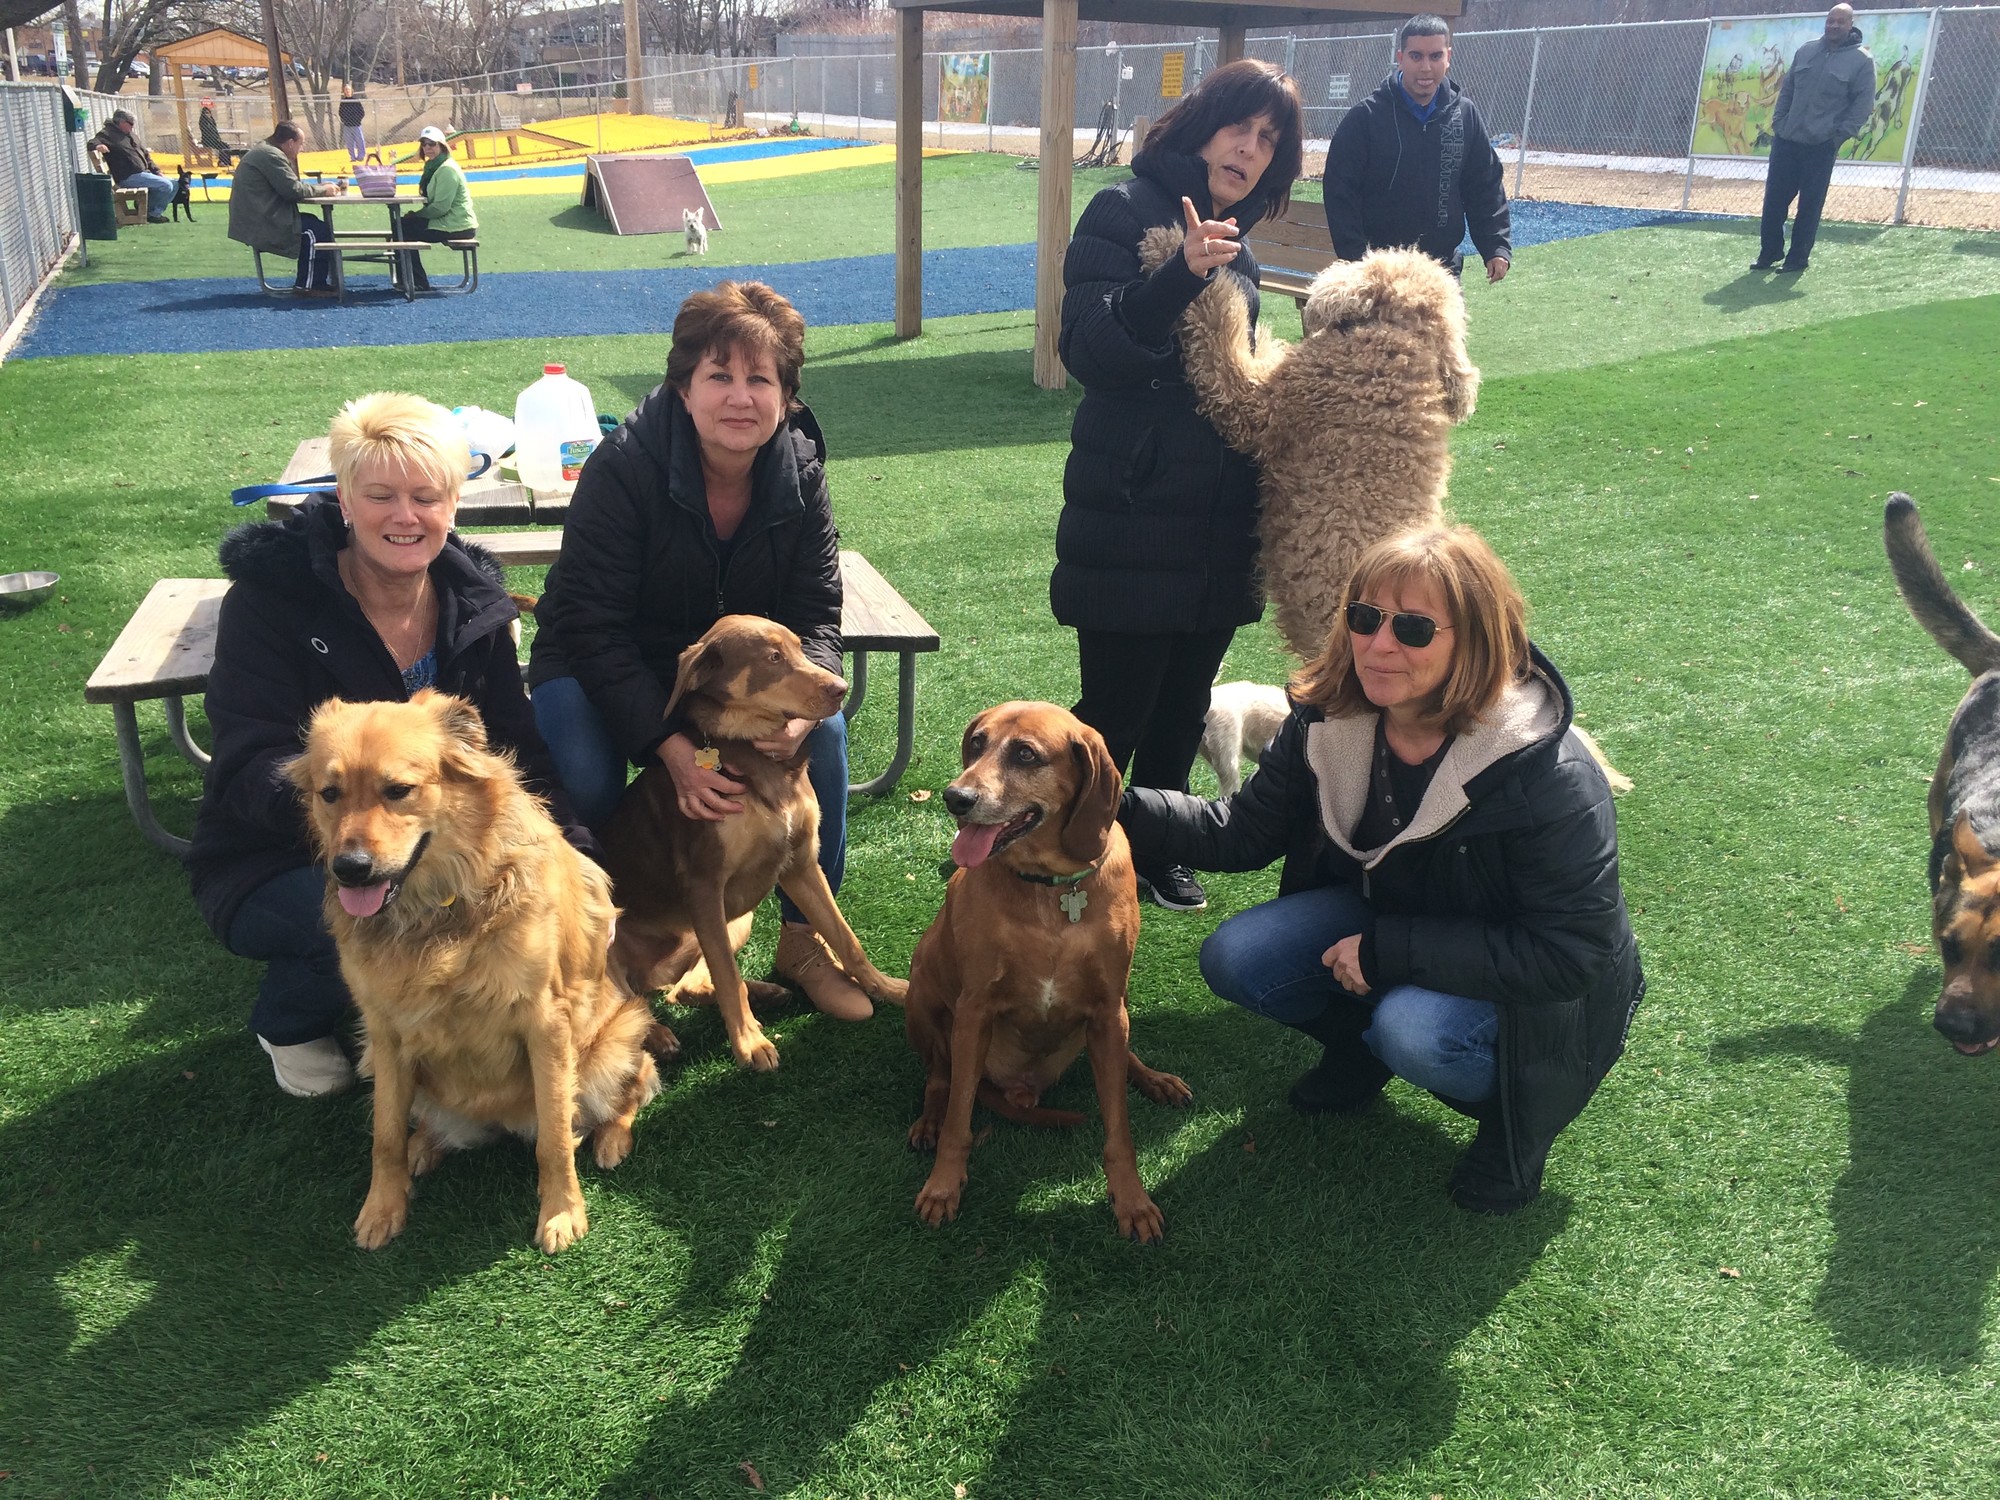 Denise Dolan, Mary Fusco, Ellen Dorshuck and Trudy Brooks enjoyed the nice weather last week at the dog park.